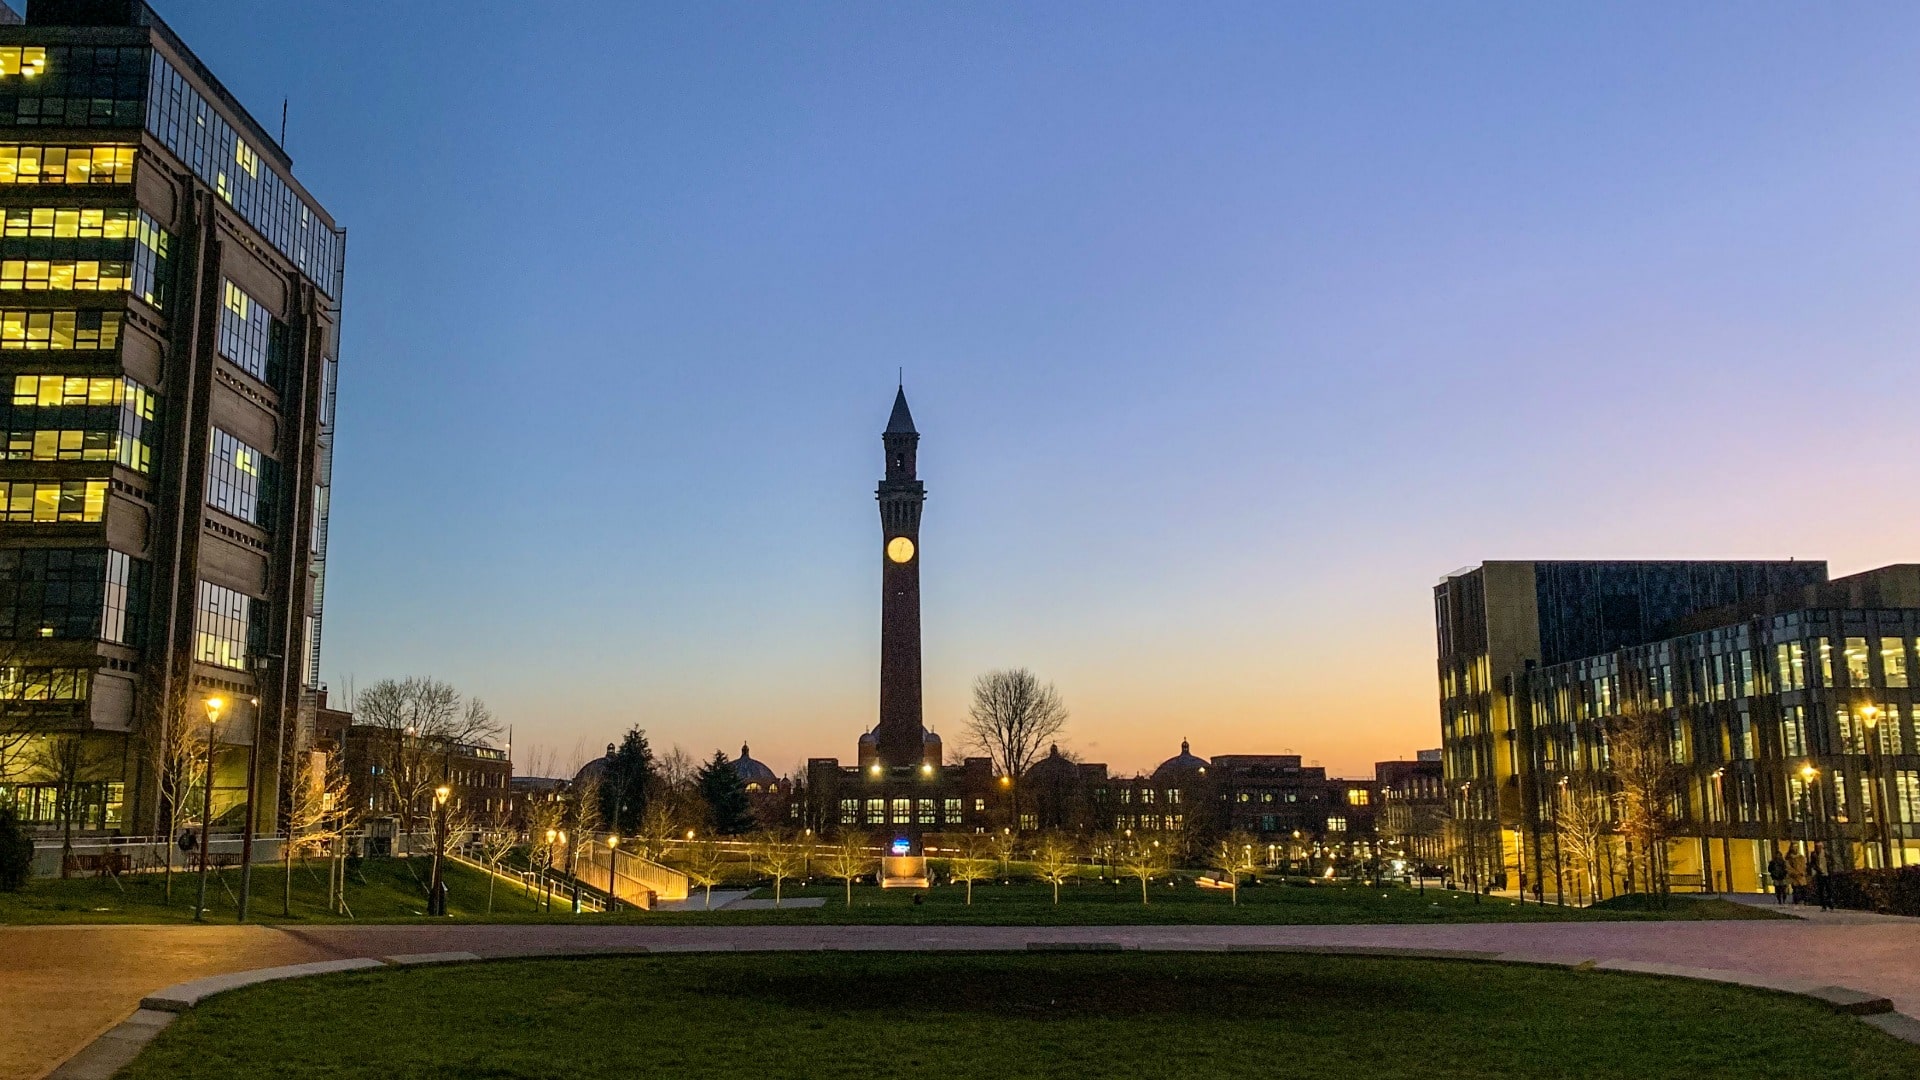 The University of Birmingham's Green Heart at dusk with 'Old Joe' clocktower in the distance.